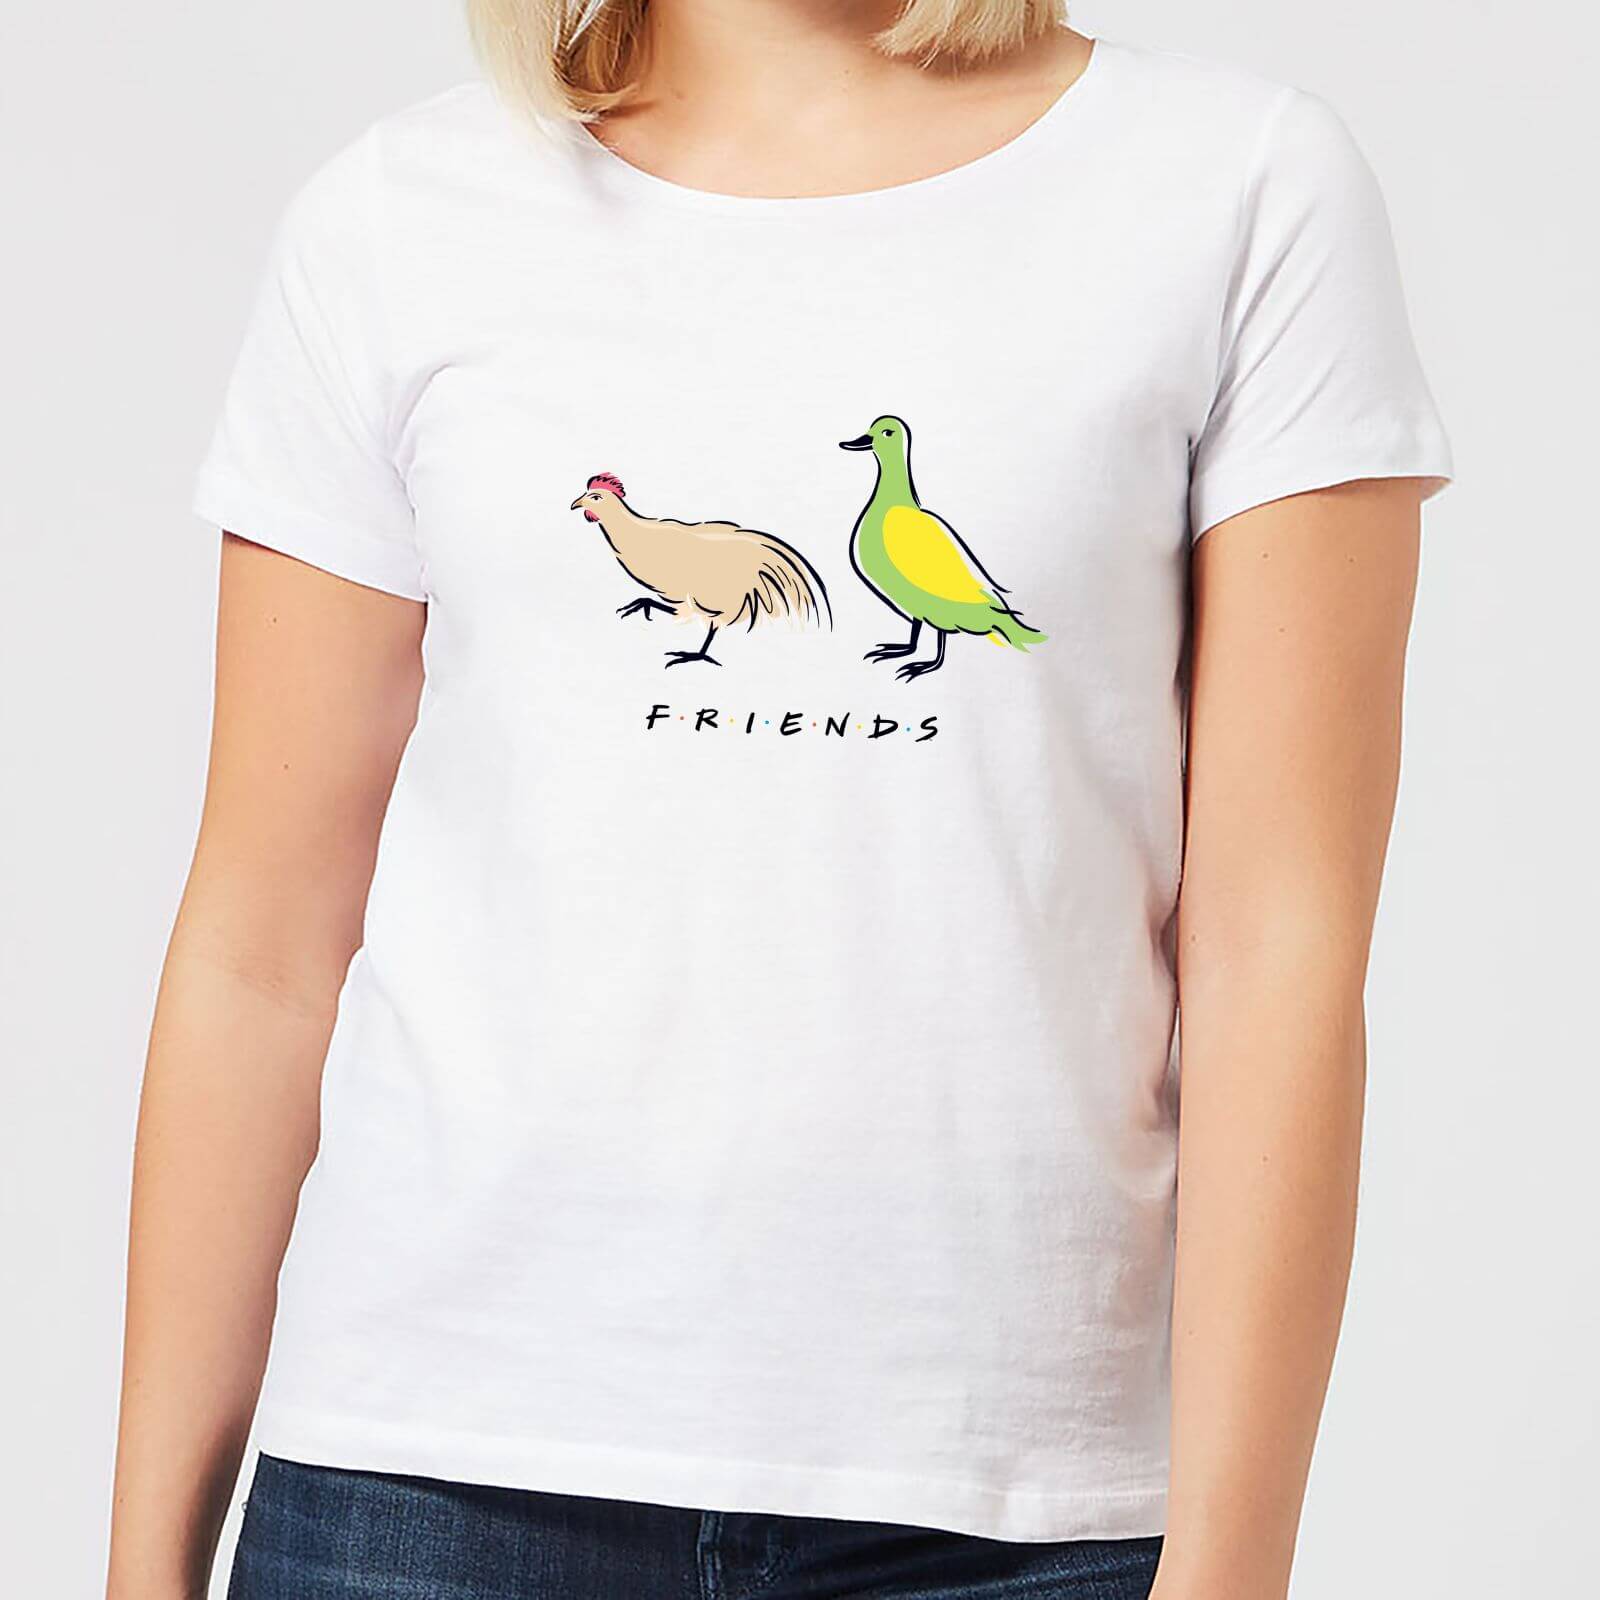 Friends The Chick And The Duck Women's T-Shirt - White - S